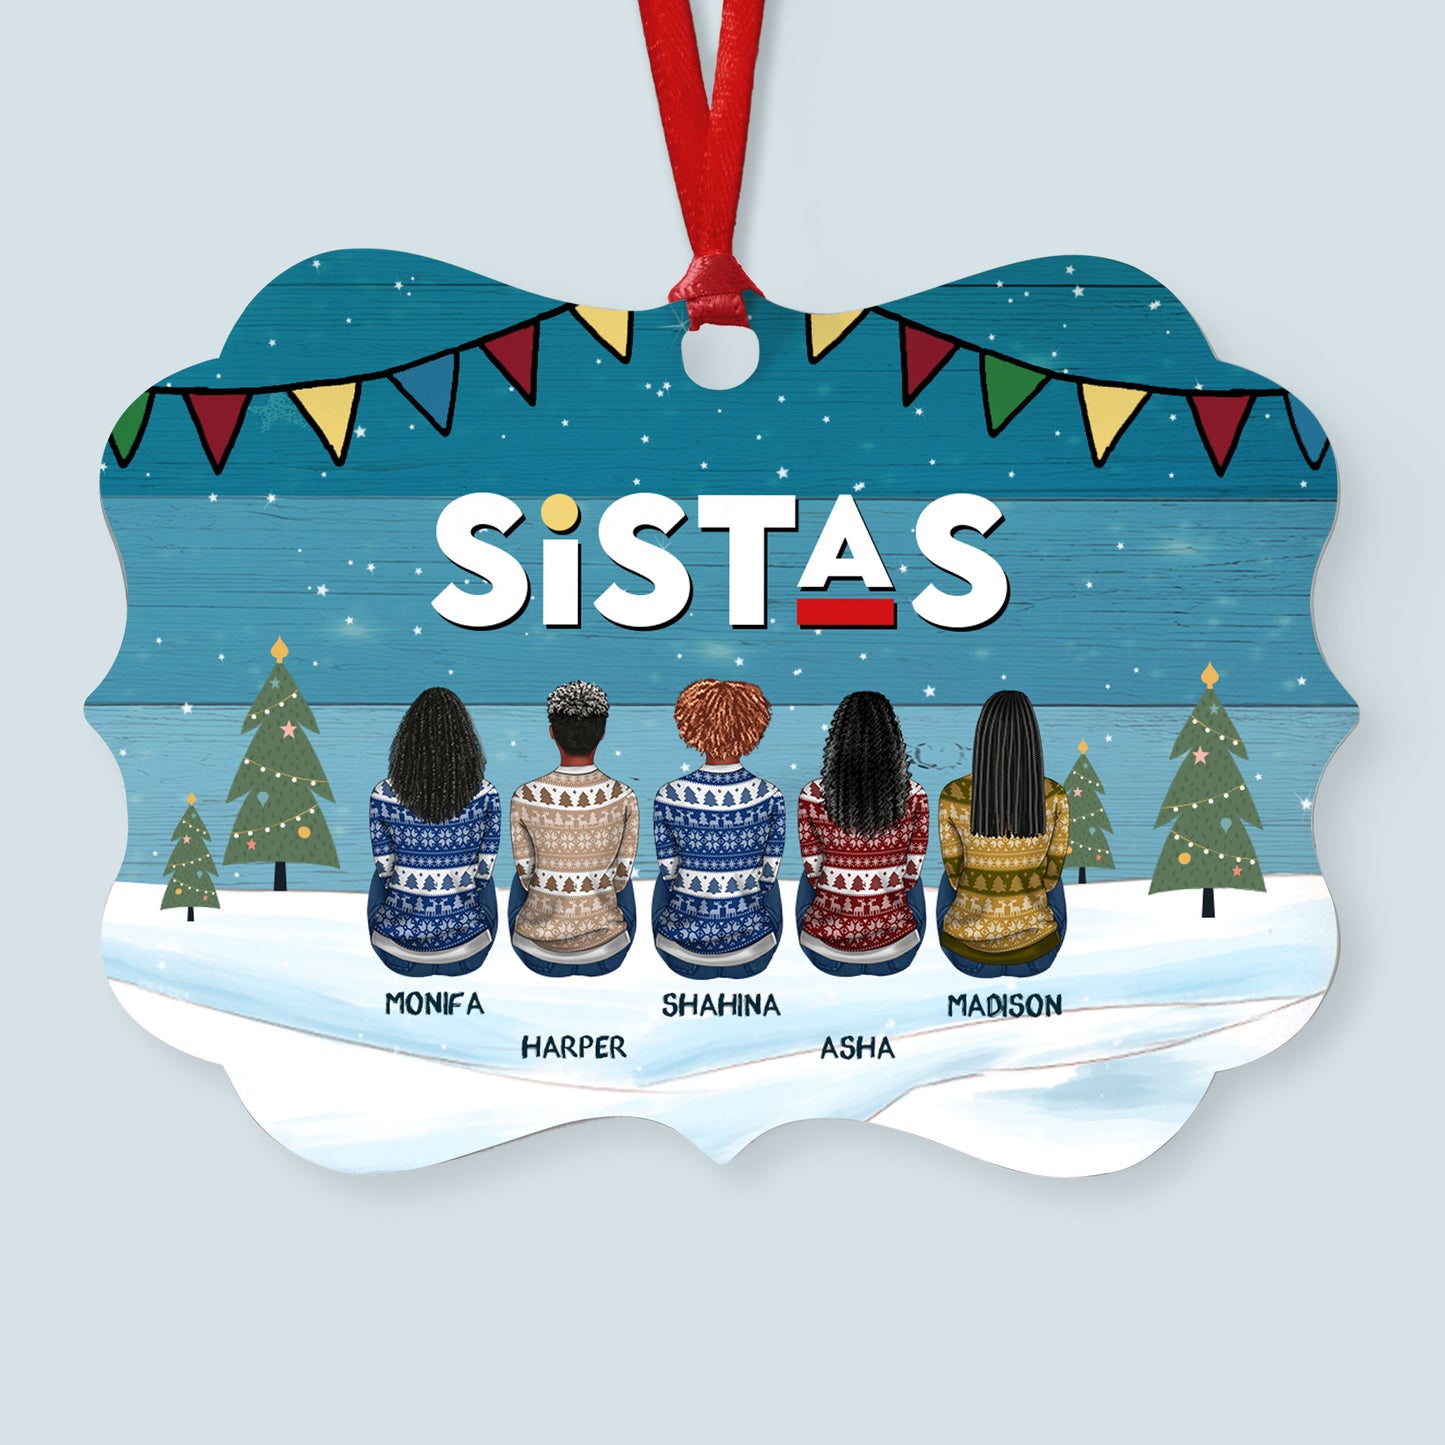 Sistas And Brothas Snowy Day - Personalized Aluminum Ornament - Christmas Gift Black Cultured Ornament For Friends And Siblings - Ugly Christmas Sweater Sitting